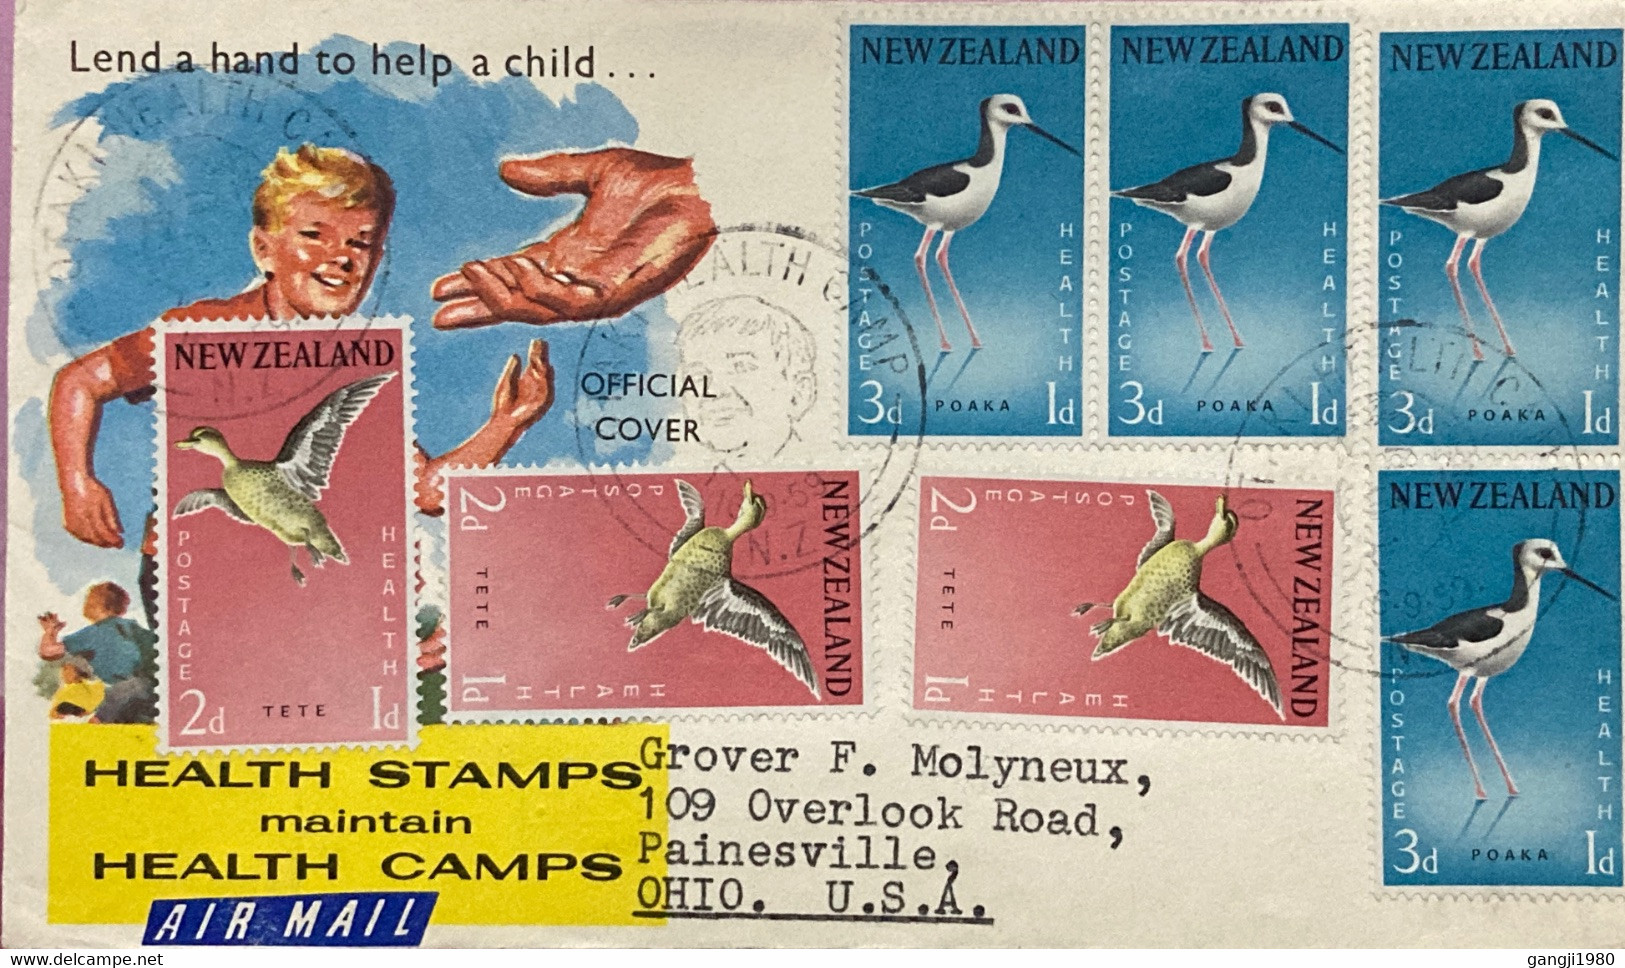 NEW ZEALAND 1959, KGVI MEMORIAL COVER, USED TO USA, CHILDREN HEALTH SPECIAL CANCEL, BIRD GREY TILL & STILT 7 STAMP USED - Covers & Documents